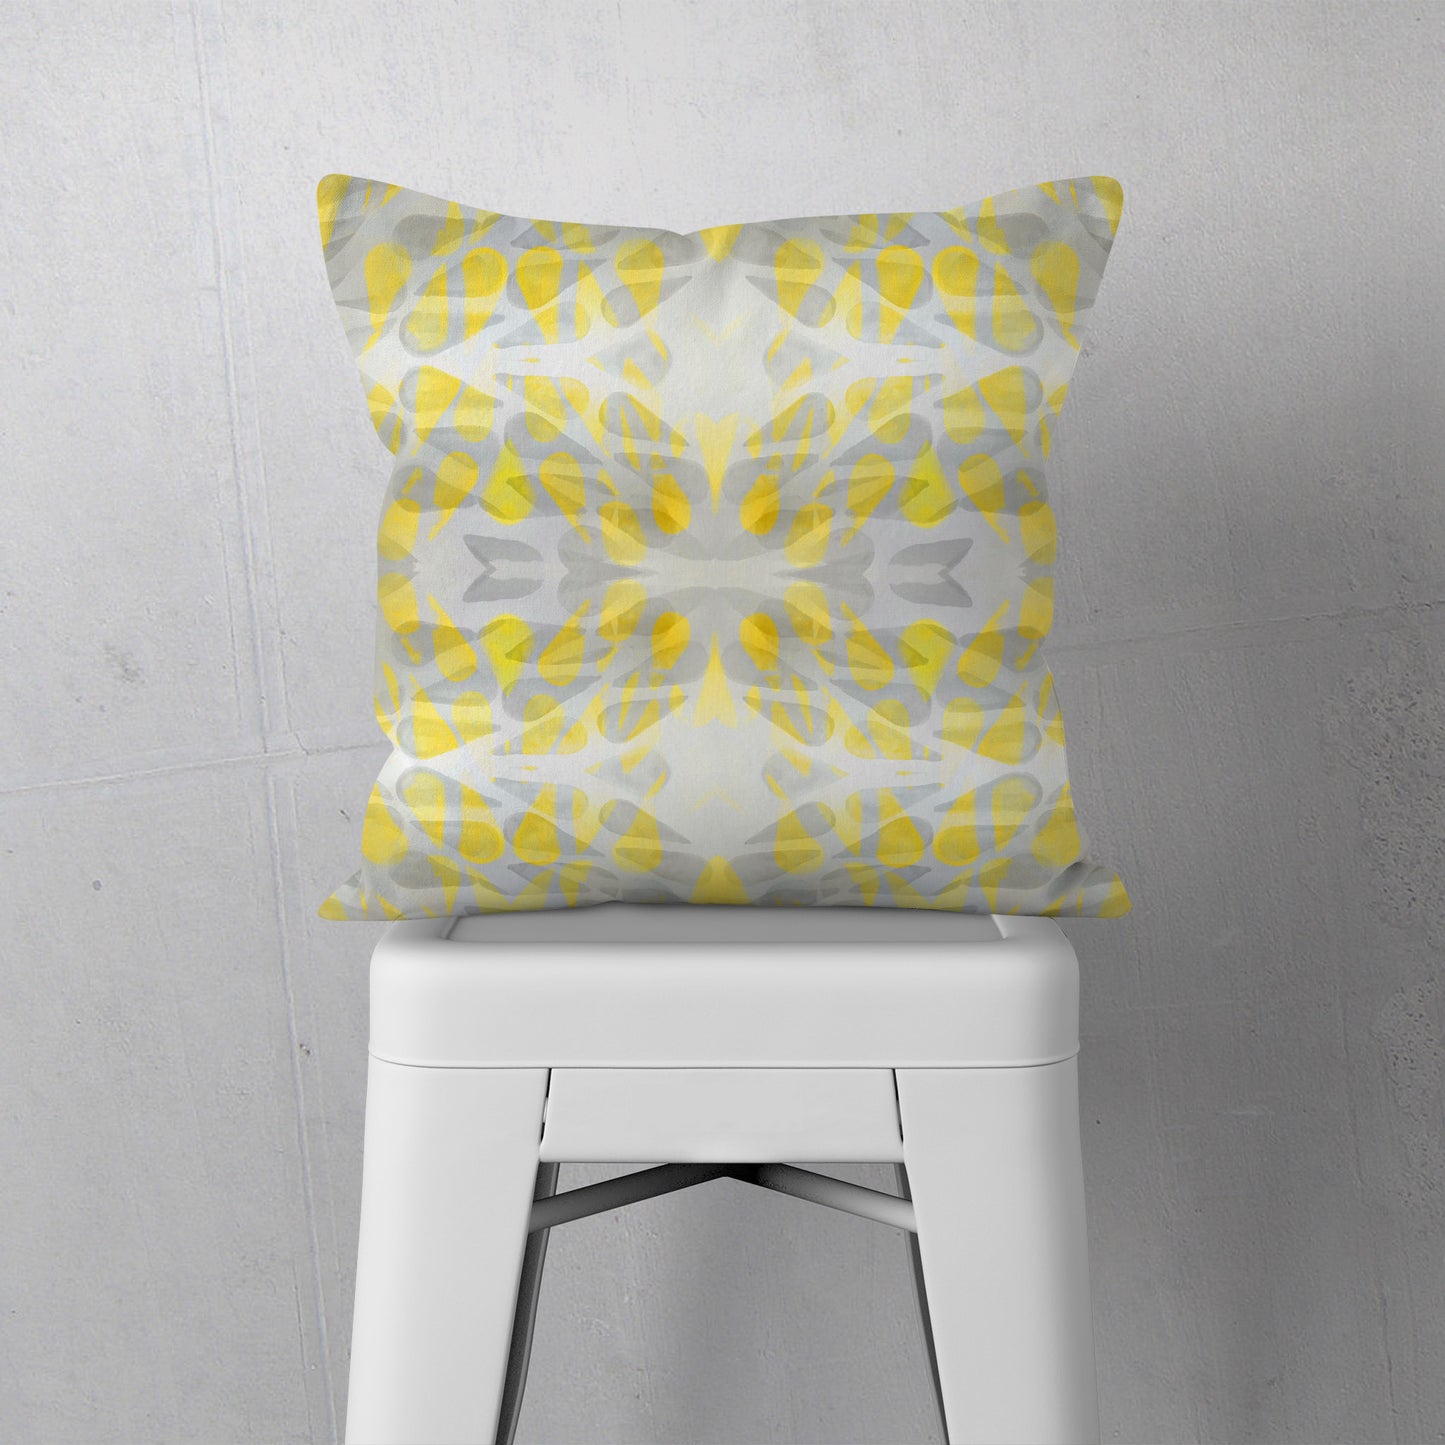 Throw pillow featuring abstract hand-painted pattern in yellow and grey sitting on a white stool.